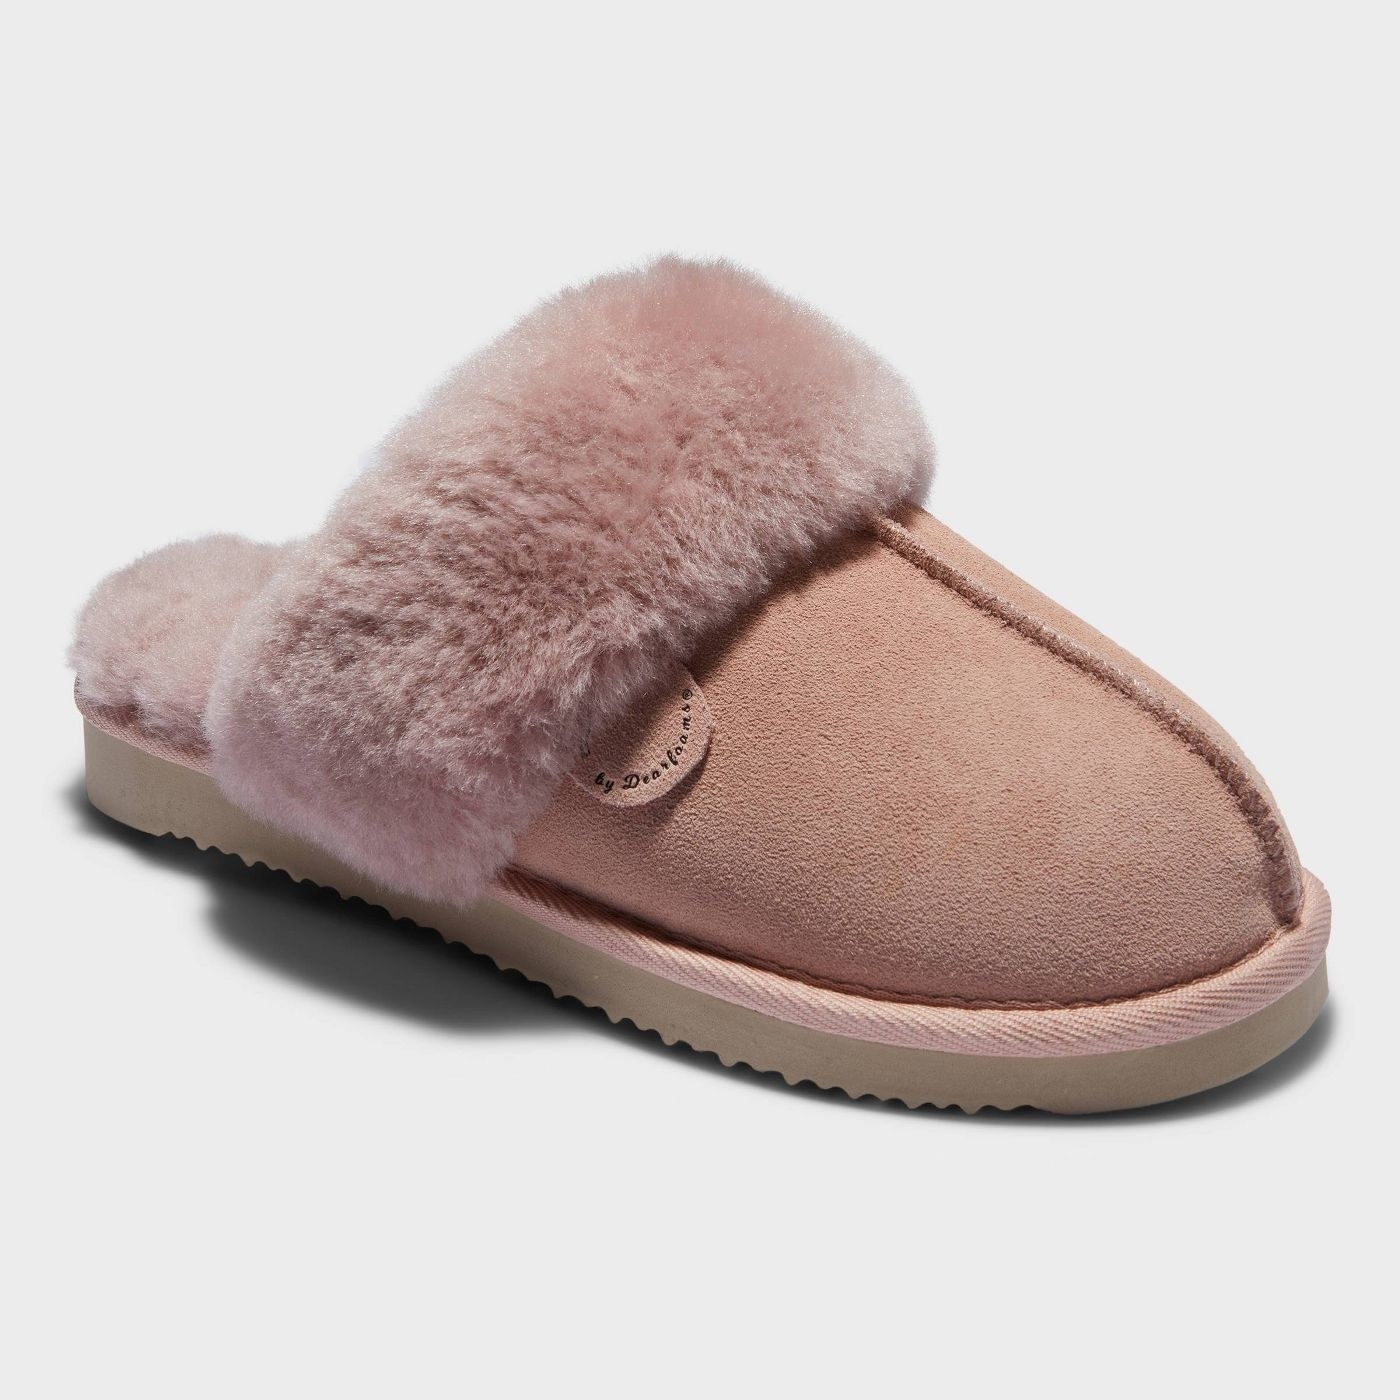 prink shearling scuff slippers with rubber sole